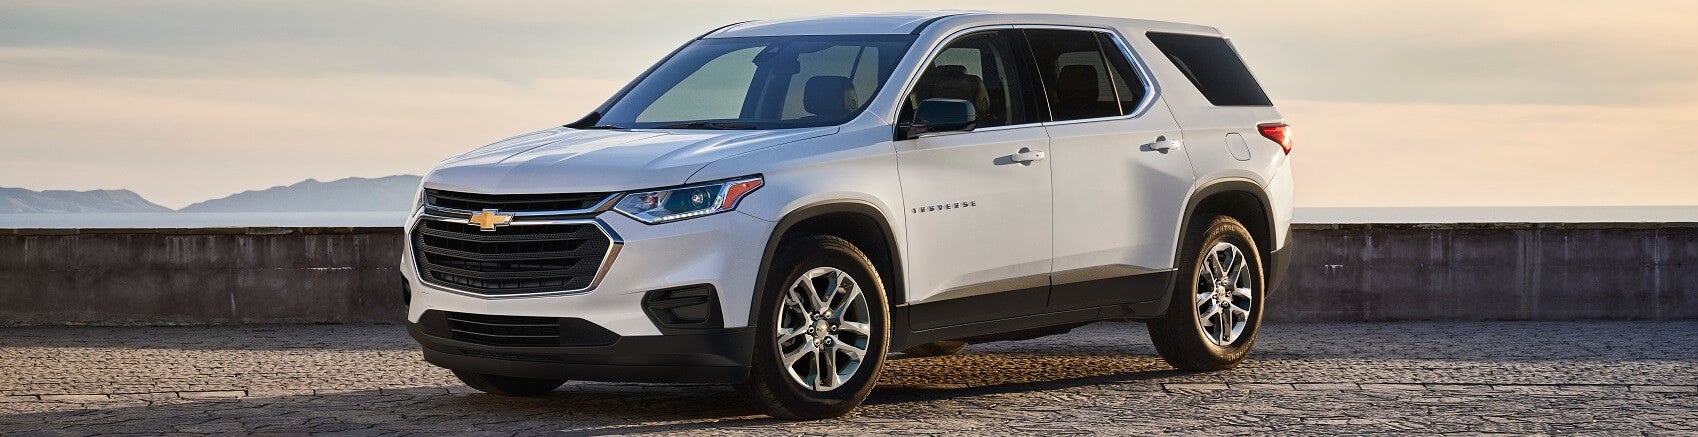 2021 Chevy Traverse Review